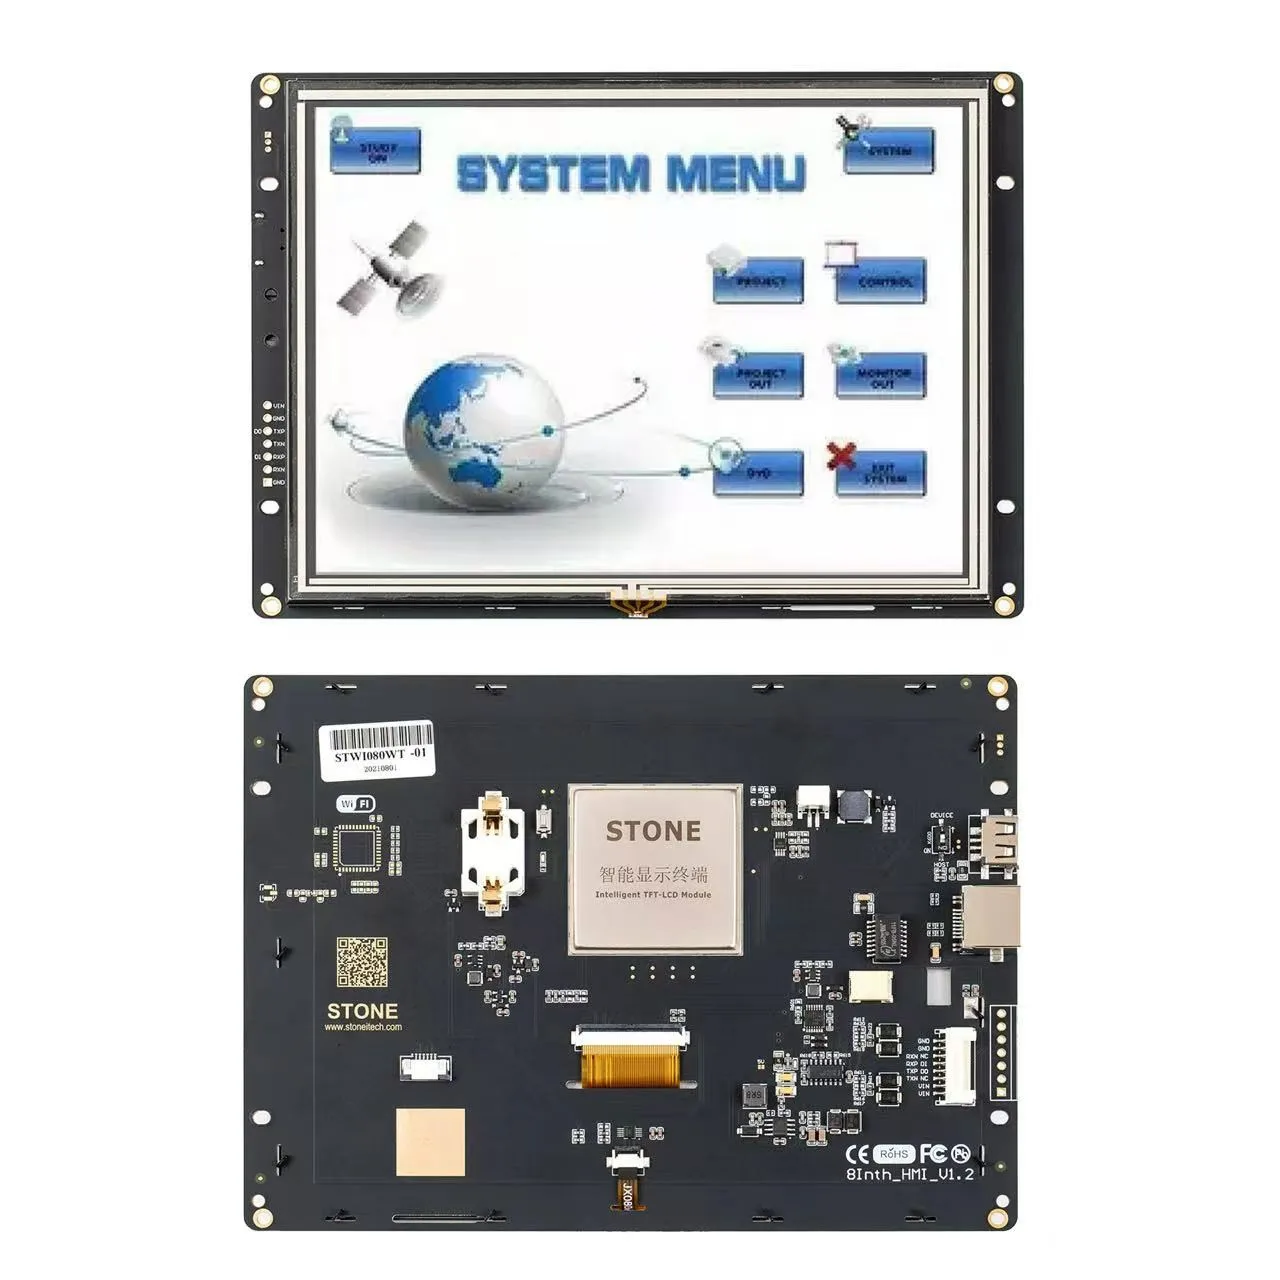 8 Inch 800x600 HMI TFT LCD RGB 262K Touch Panel with Controller Board + Driver + GUI Software + UART Port